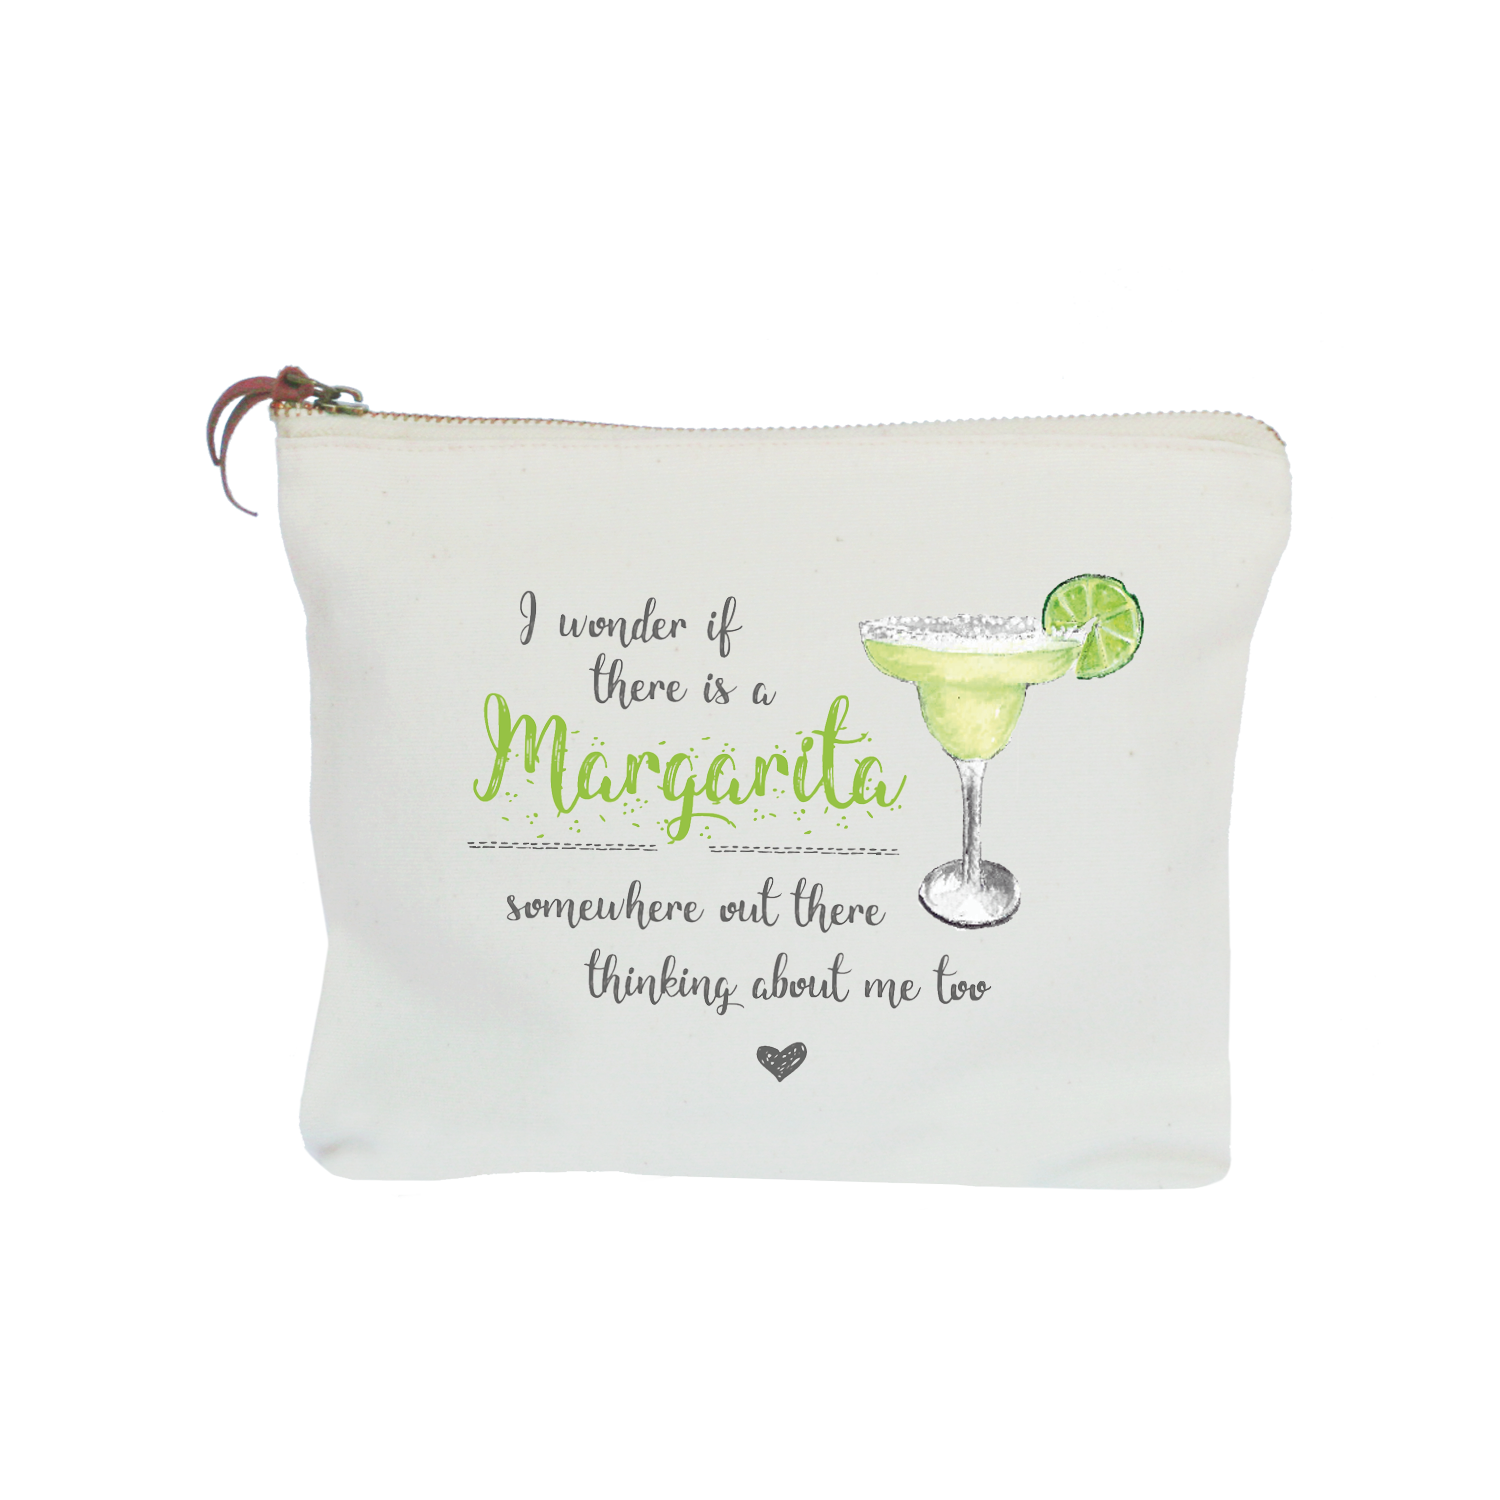 margarita thinking about me too zipper pouch